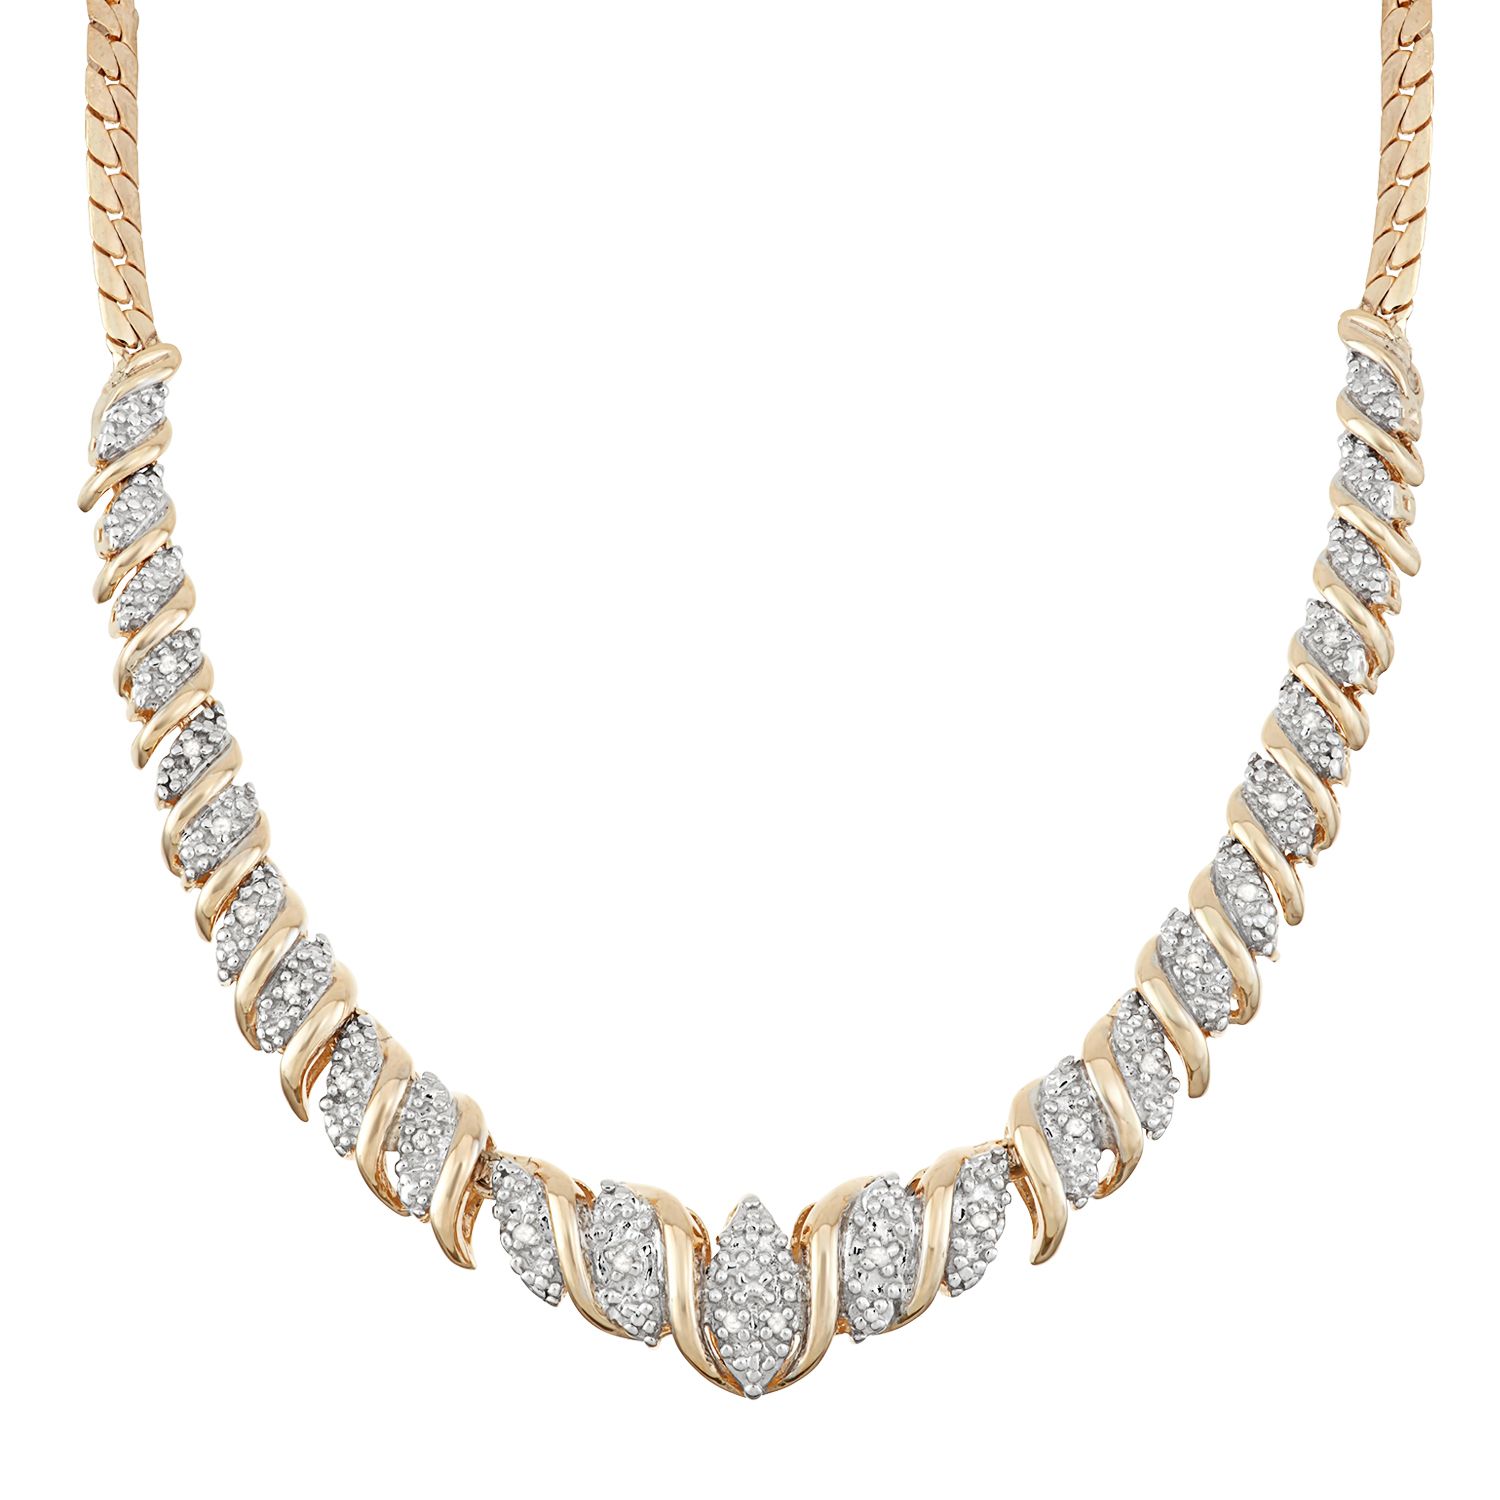 HYT Jewelry 18kt gold and platinum diamond necklace - Silver